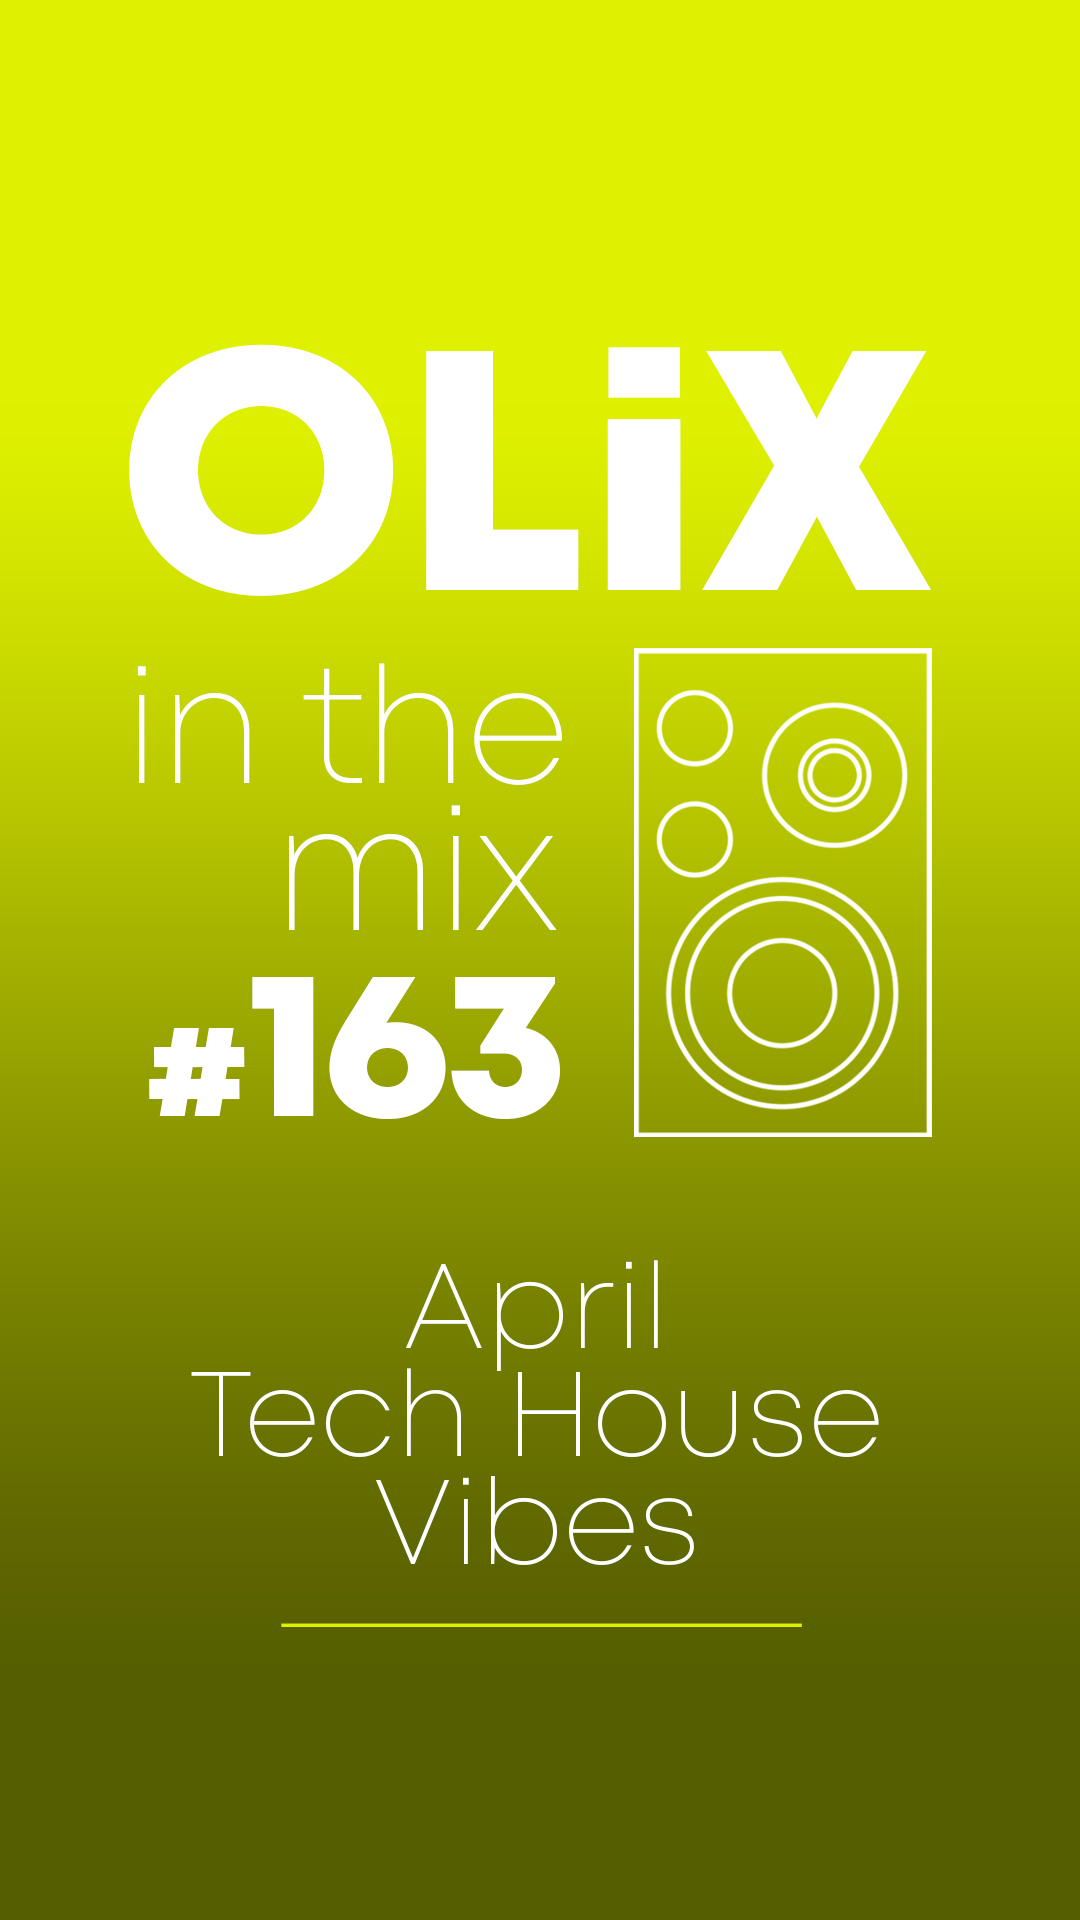 OLiX in the Mix - 163 - April Tech House Vibes